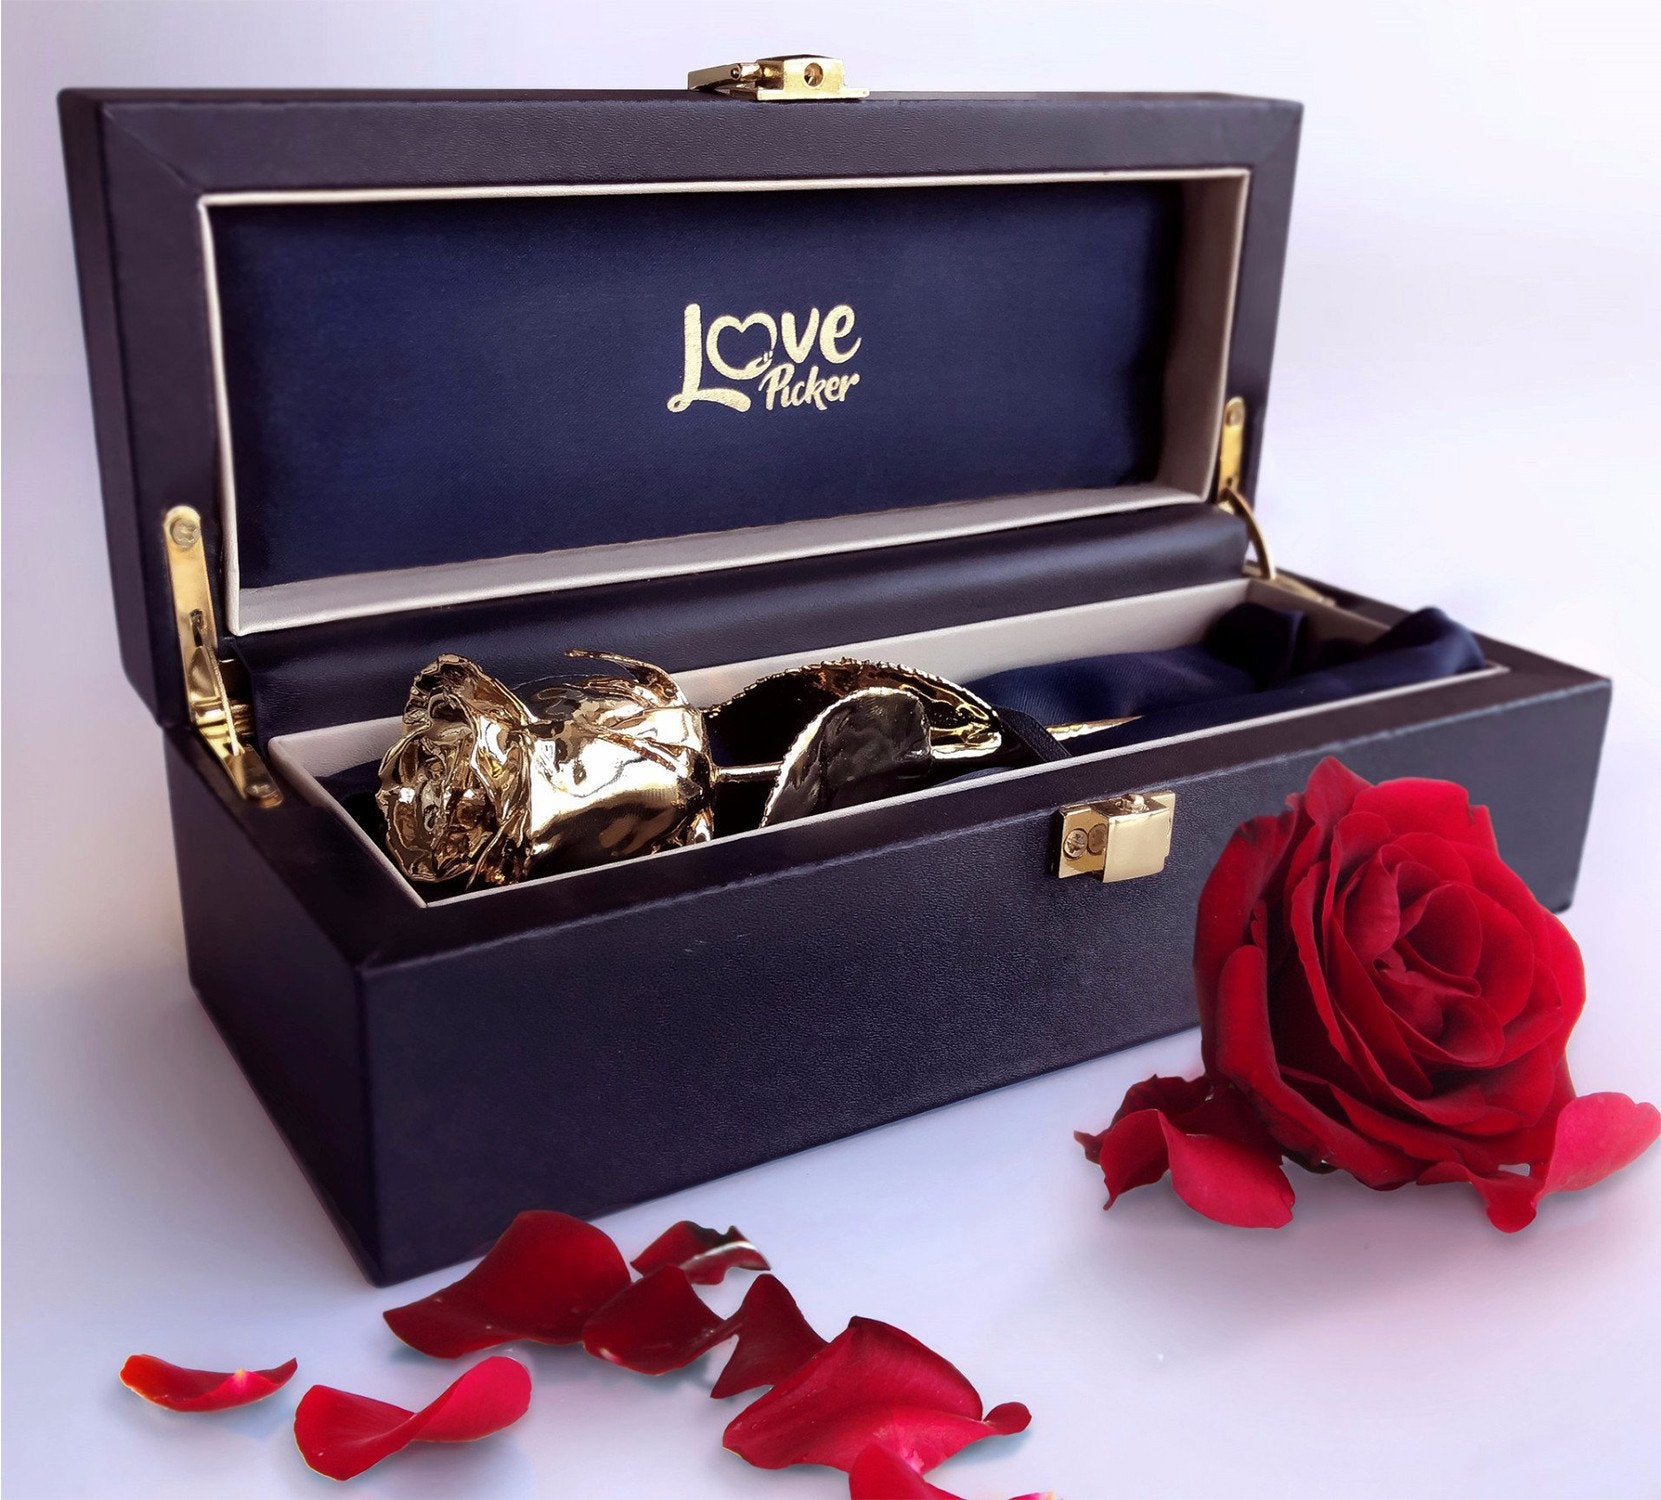 Custom Engraved Box "Your Name Here" example - 24 Karat Gold Dipped Natural Rose 7" - Natural Rose Petals on image - Lovepicker